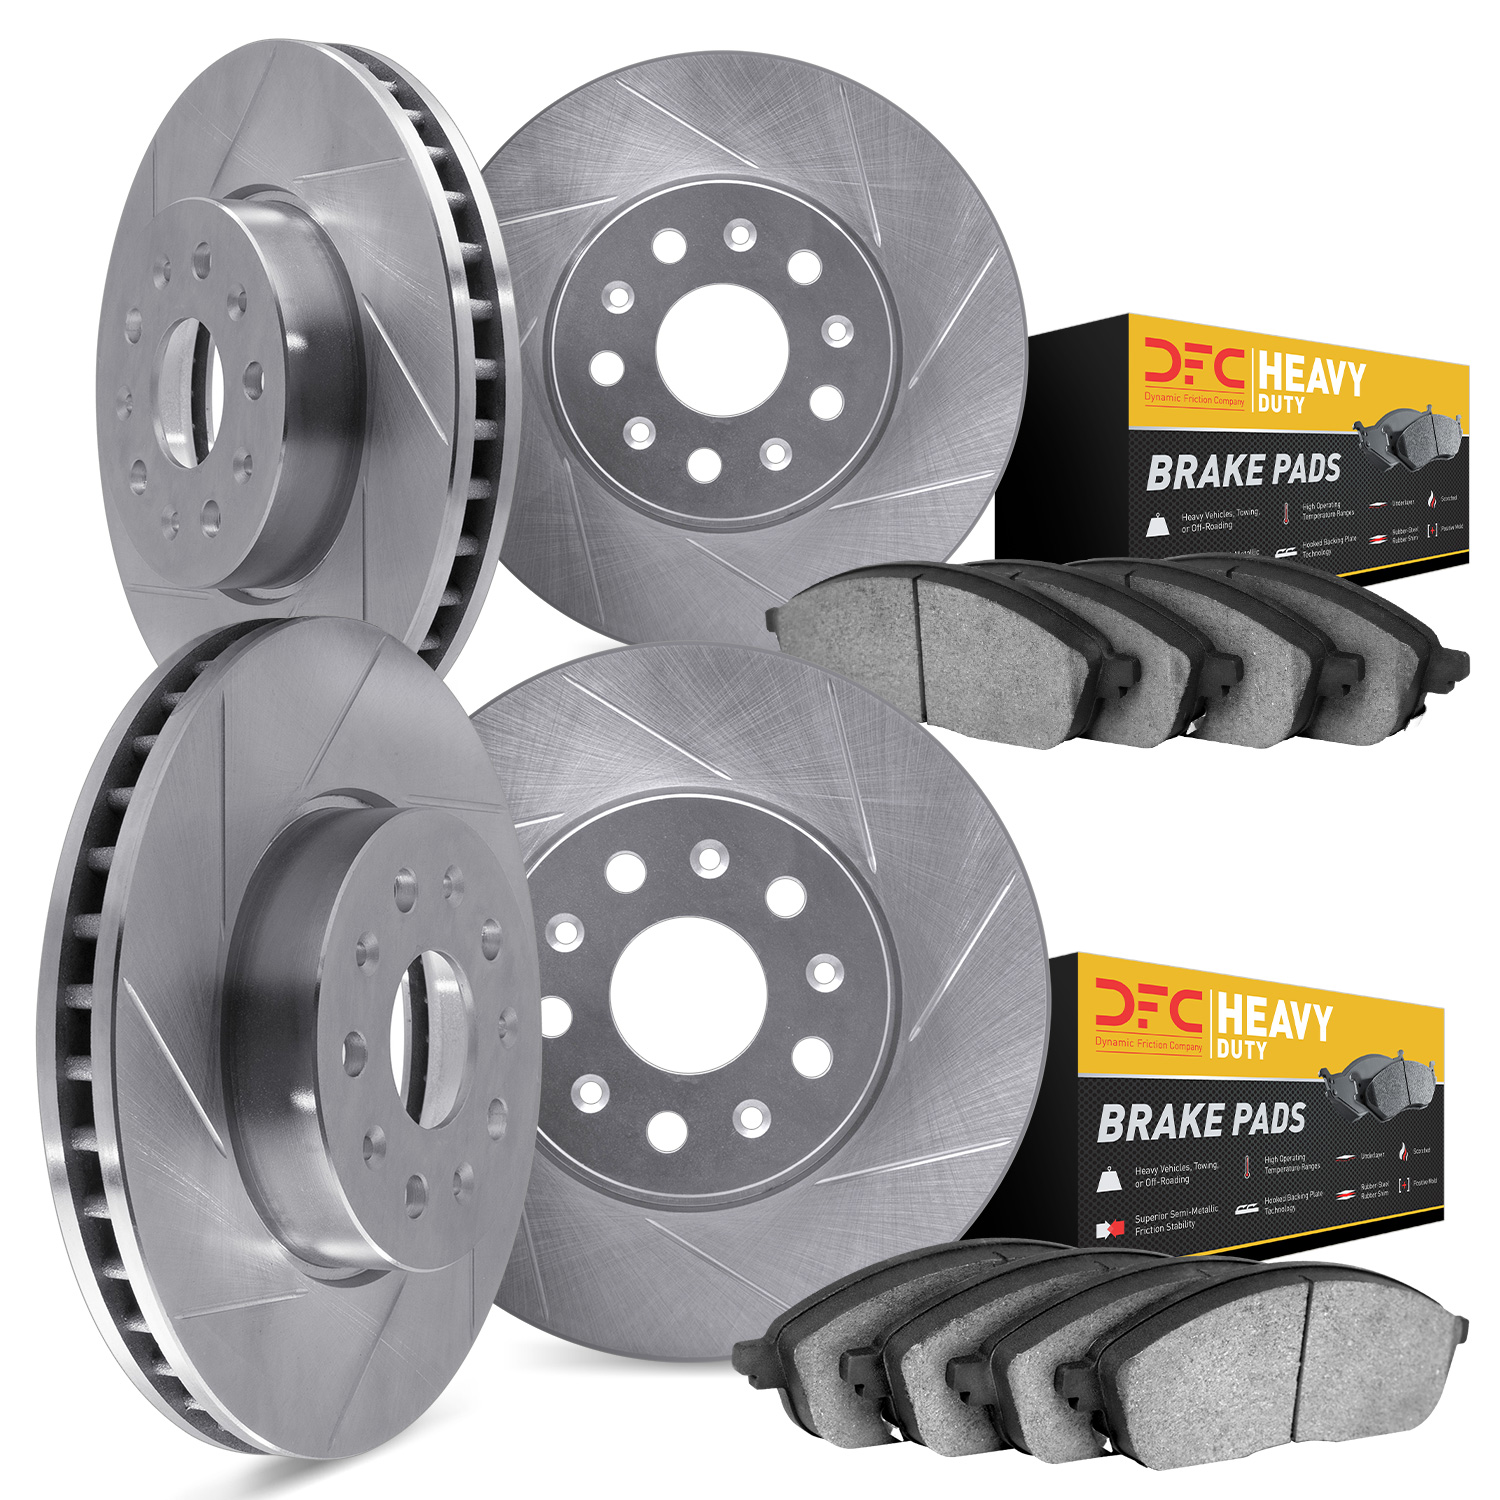 5204-76006 Slotted Brake Rotors w/Heavy-Duty Brake Pads Kits [Silver], Fits Select Lexus/Toyota/Scion, Position: Front and Rear